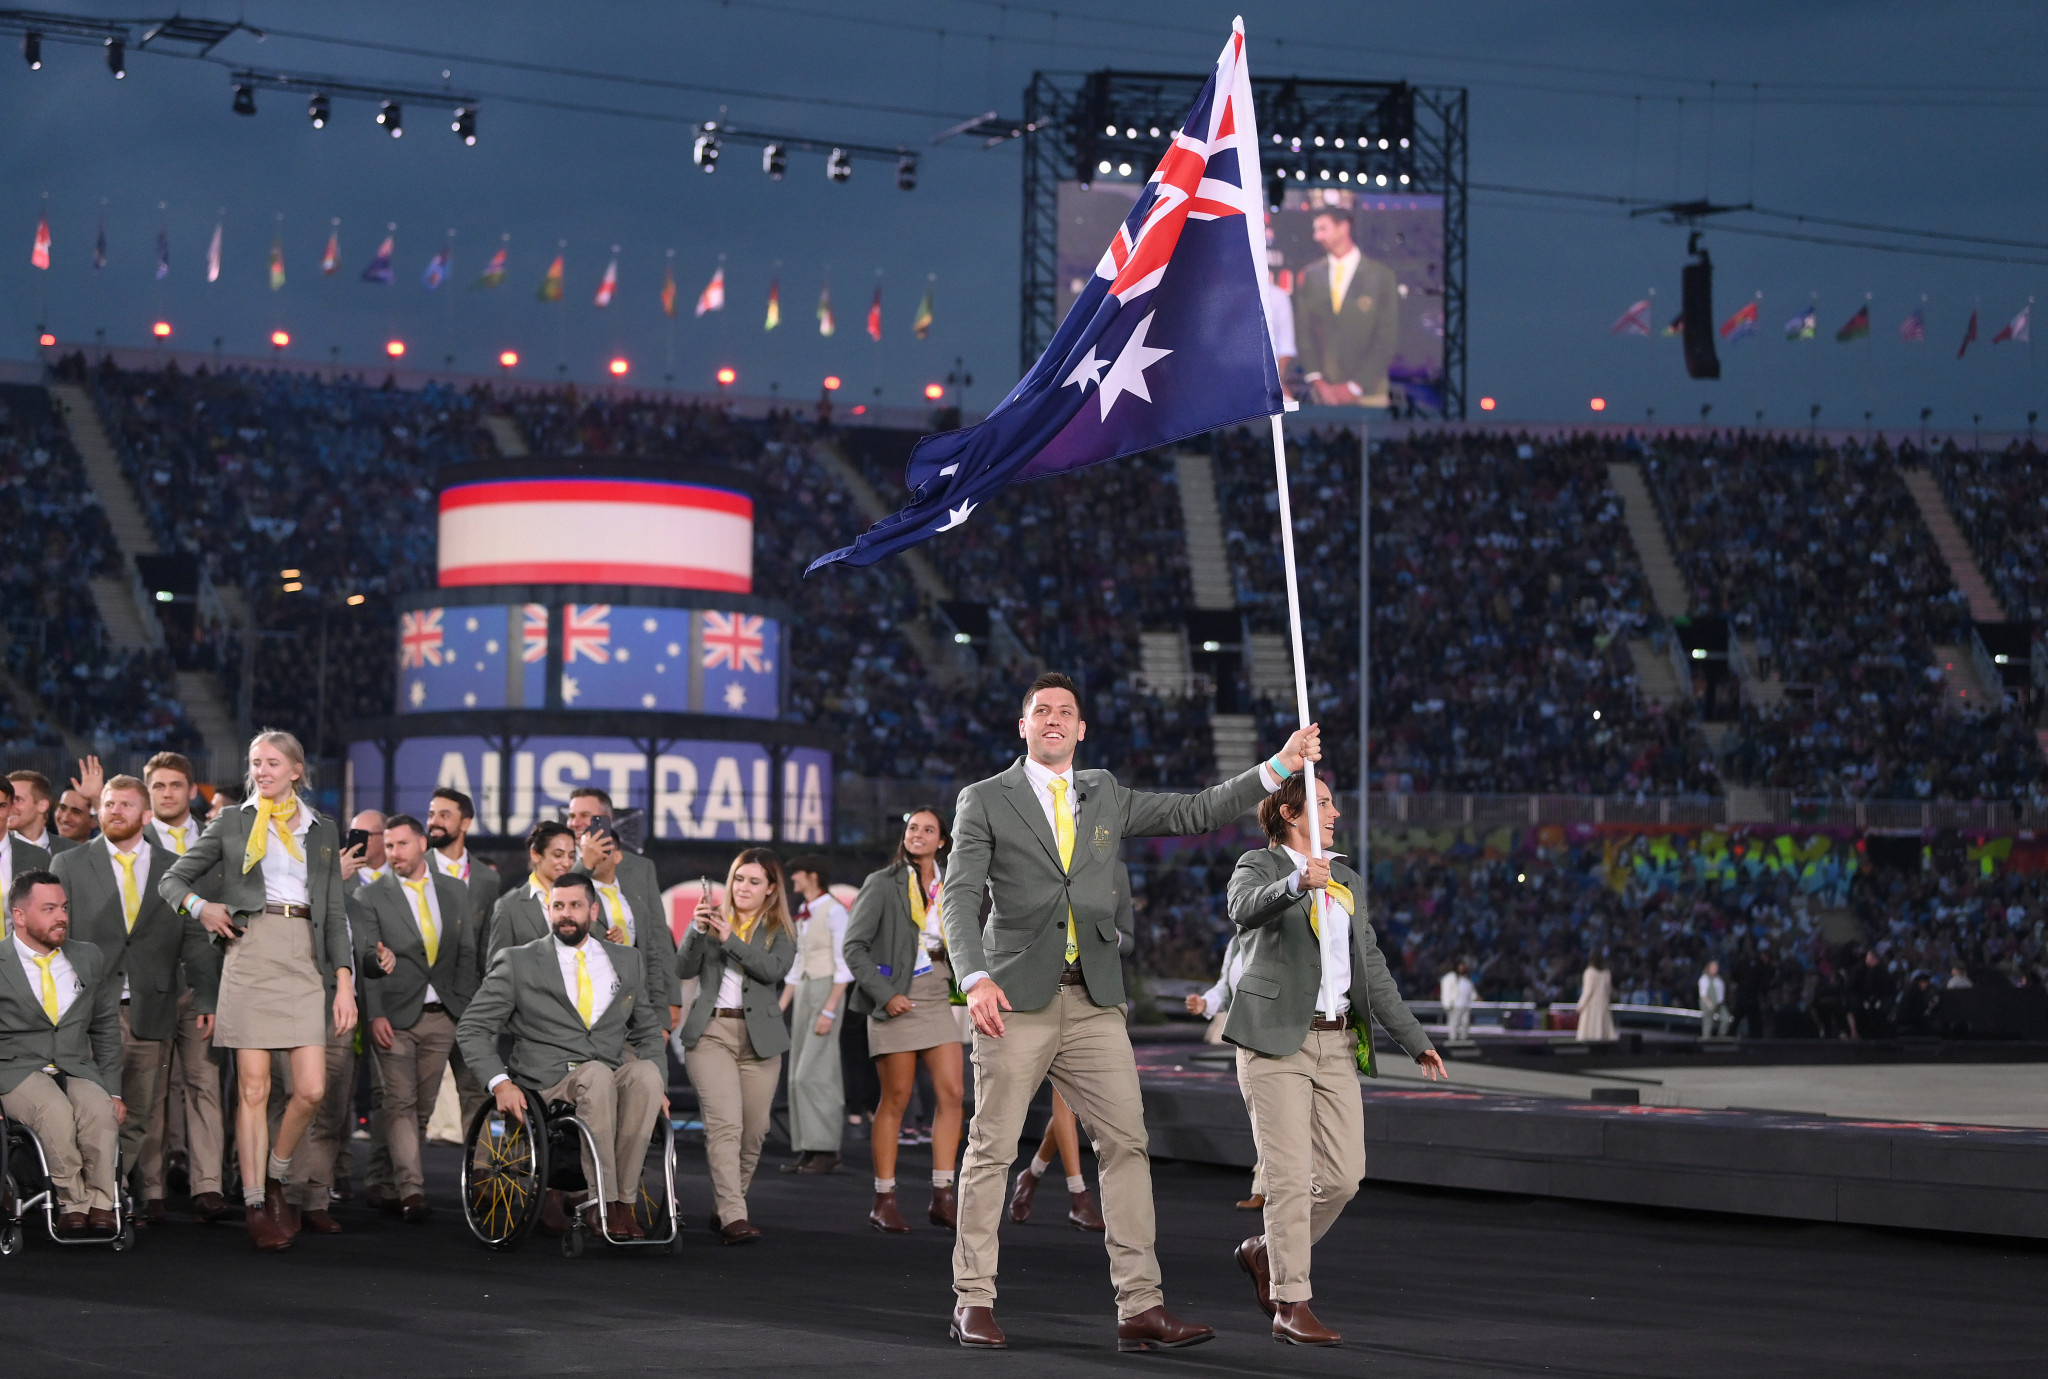 Australia were the first of the 72 nations to enter the Alexander Stadium during the Athletes Assembly, led by flagbearers Eddie Ockenden, left, and Rachael Grinham ©Getty Images